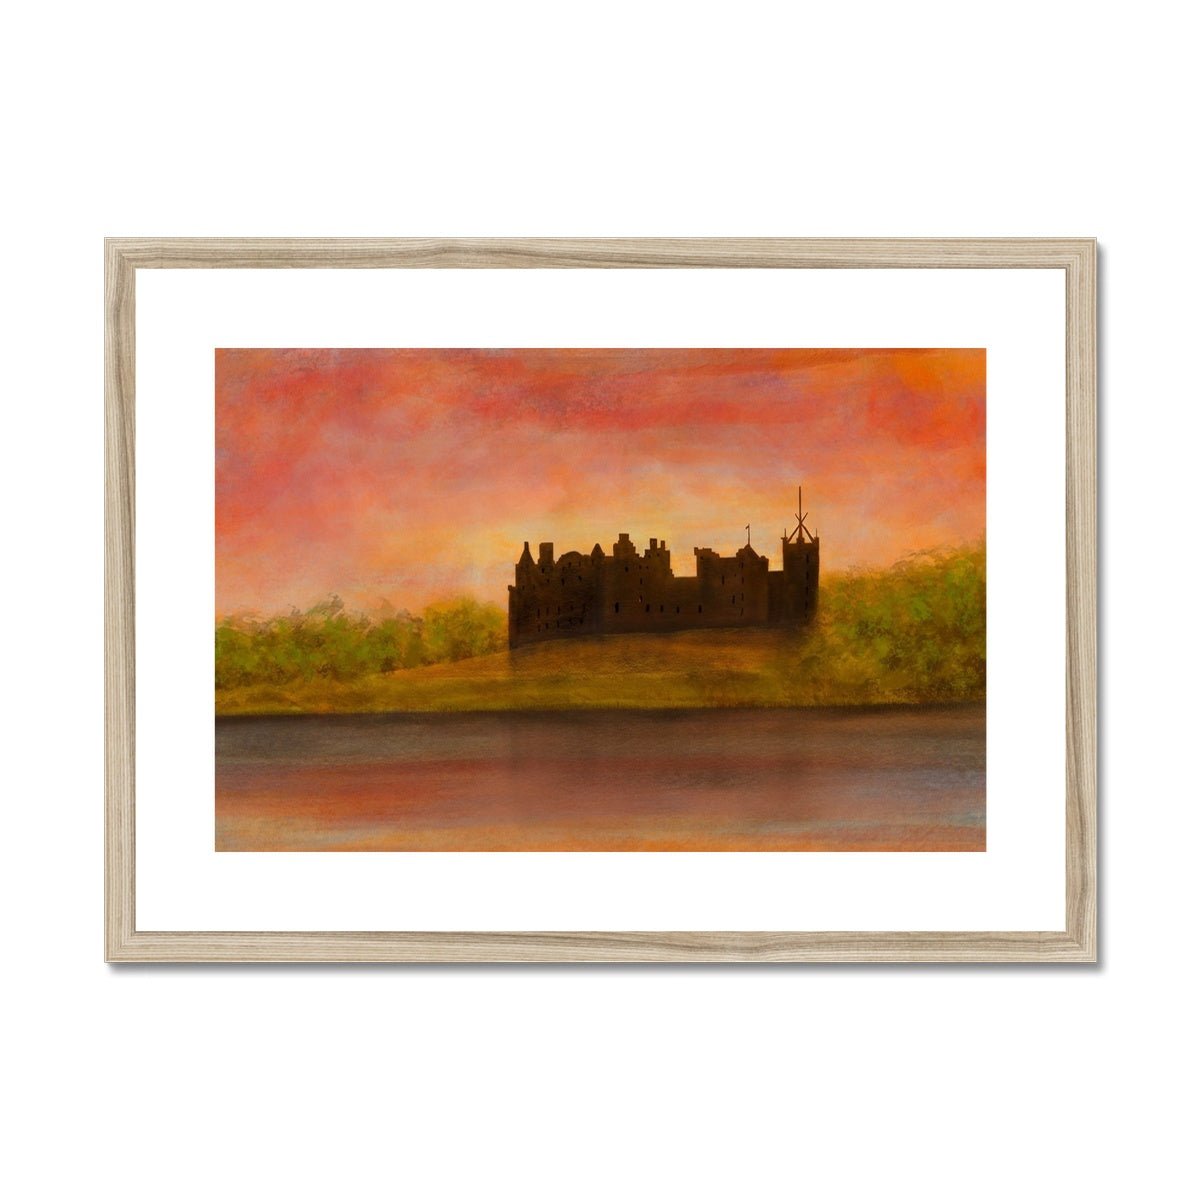 Linlithgow Palace Dusk Painting | Framed & Mounted Prints From Scotland-Framed & Mounted Prints-Historic & Iconic Scotland Art Gallery-A2 Landscape-Natural Frame-Paintings, Prints, Homeware, Art Gifts From Scotland By Scottish Artist Kevin Hunter